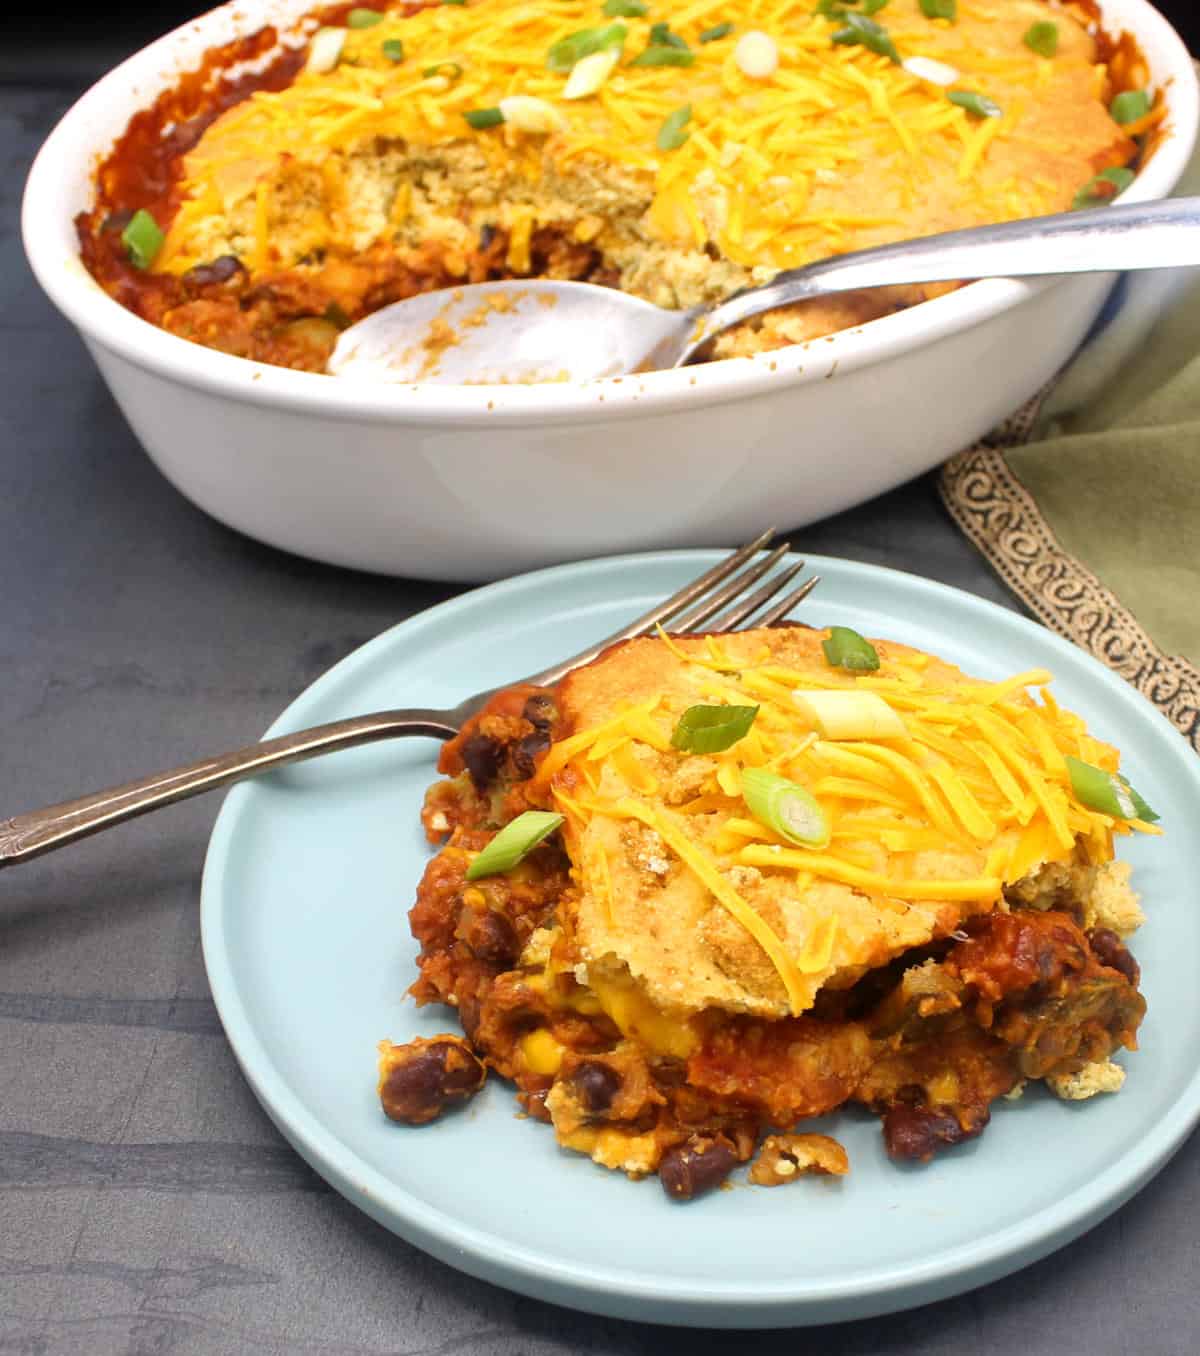 A portion of vegan tamale pie in blue plate with casserole in background.